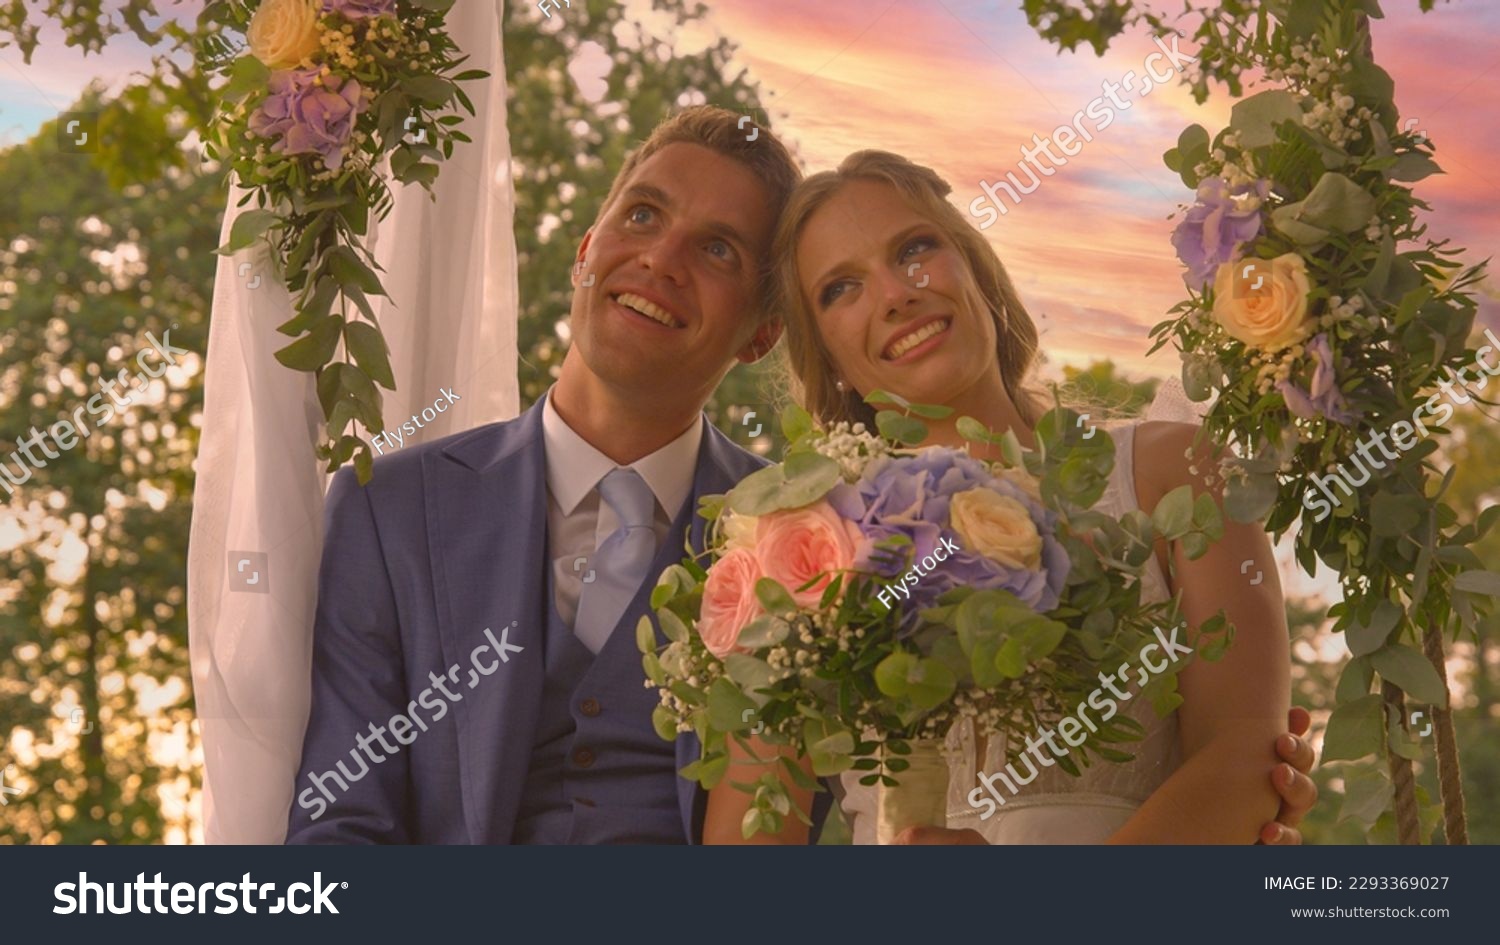 PORTRAIT, LENS FLARE: Smiling newlyweds posing on a beautifully decorated swing. Lovely bride and handsome groom in embrace of each other under colorful summer sunset clouds on their wedding day. #2293369027